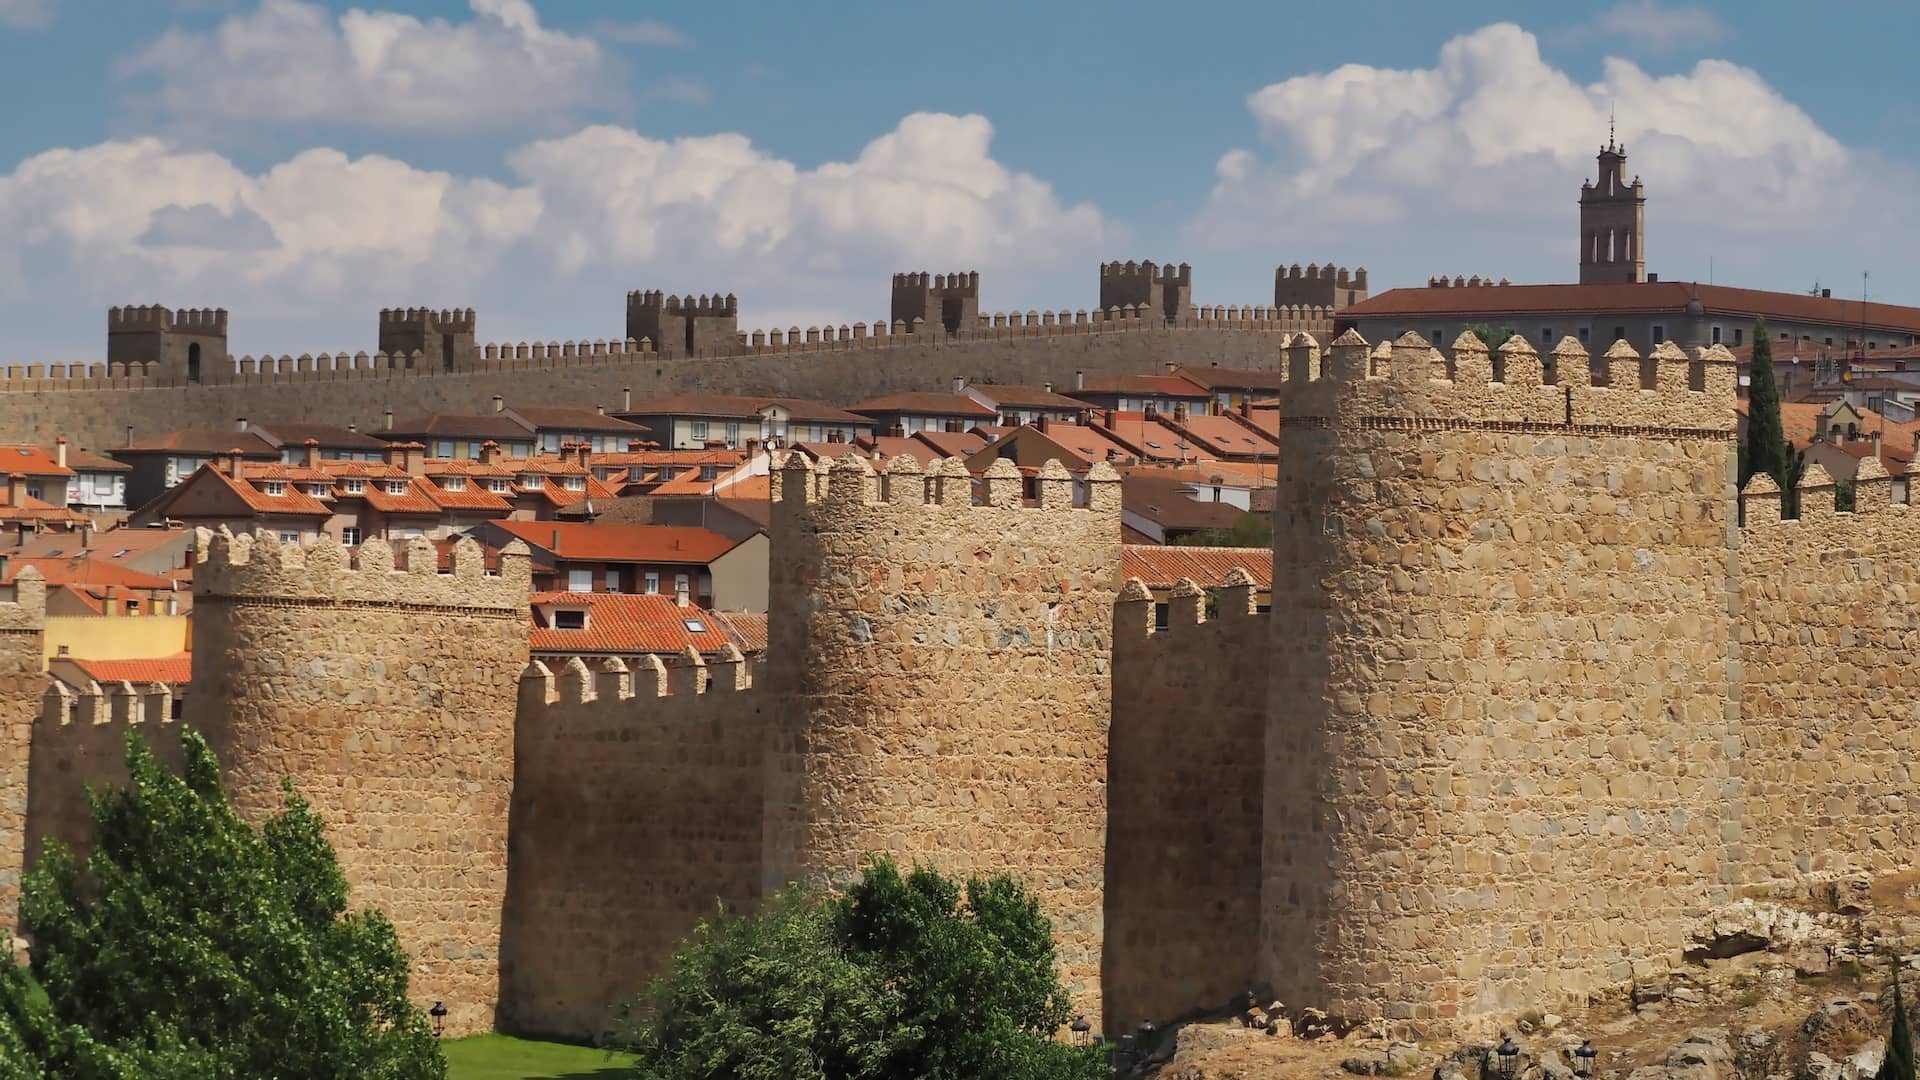 A wall with turrets surrounding red-roofed buildings